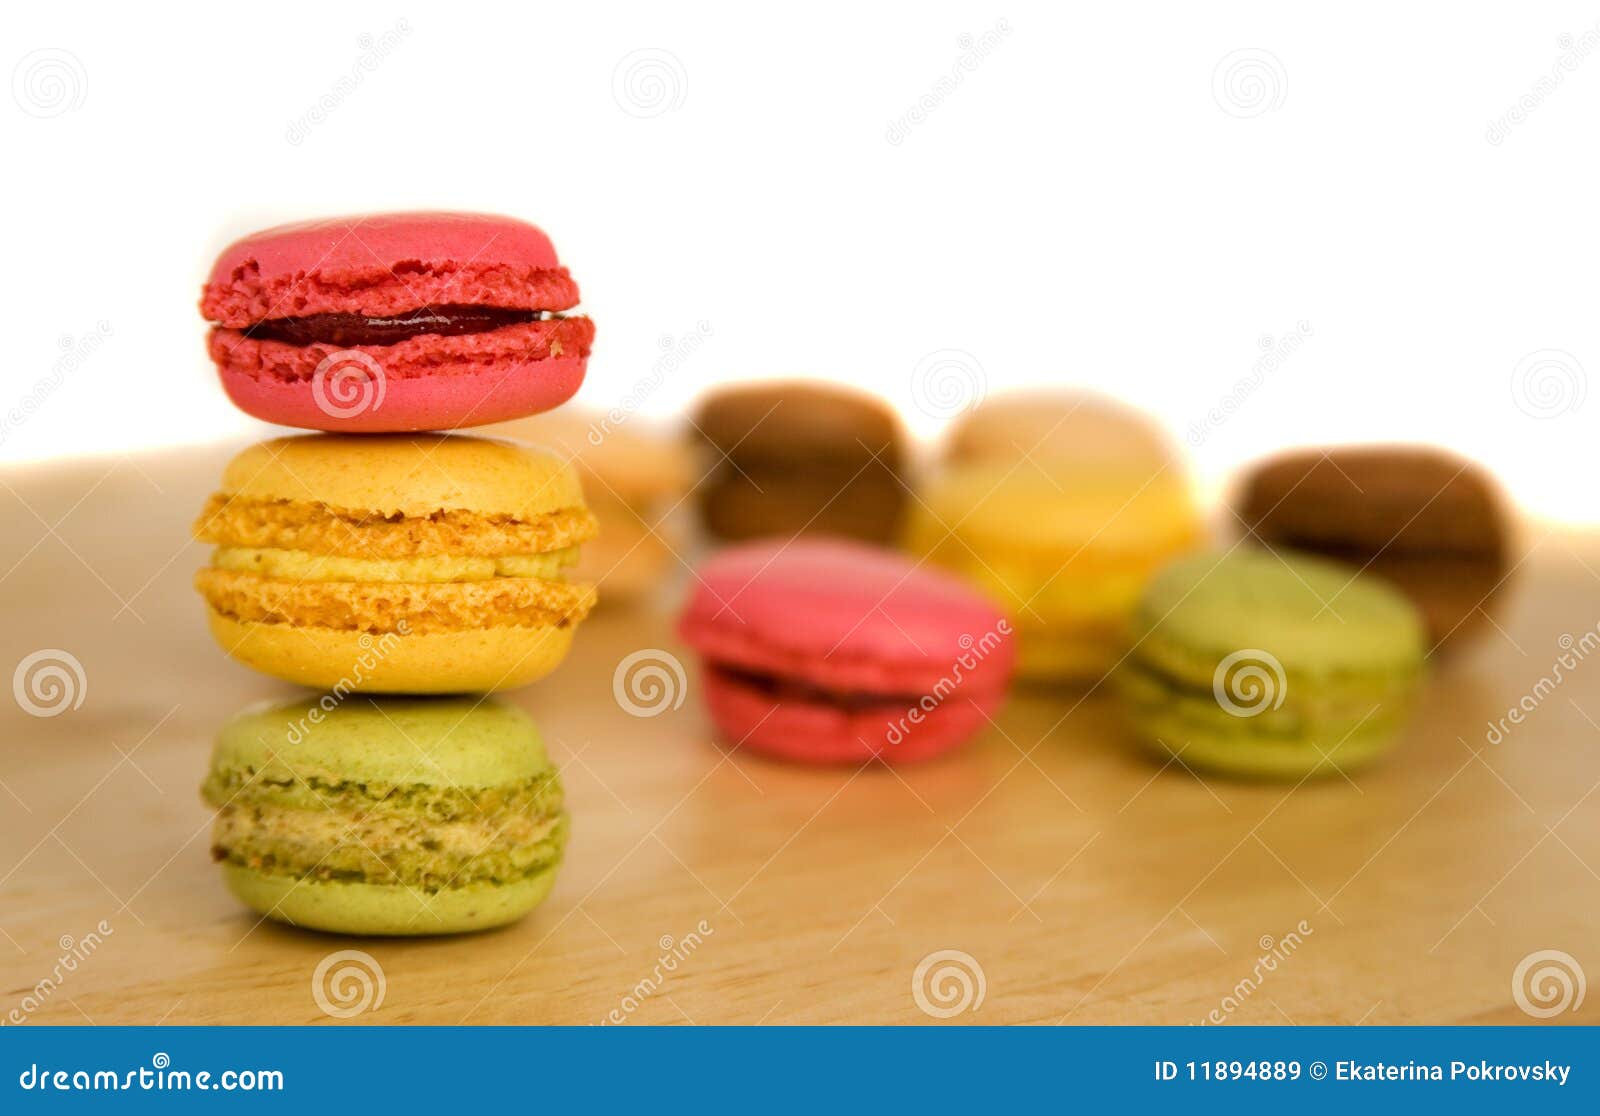 French Multicolored Macaroon Cookies Stock Image - Image of ...